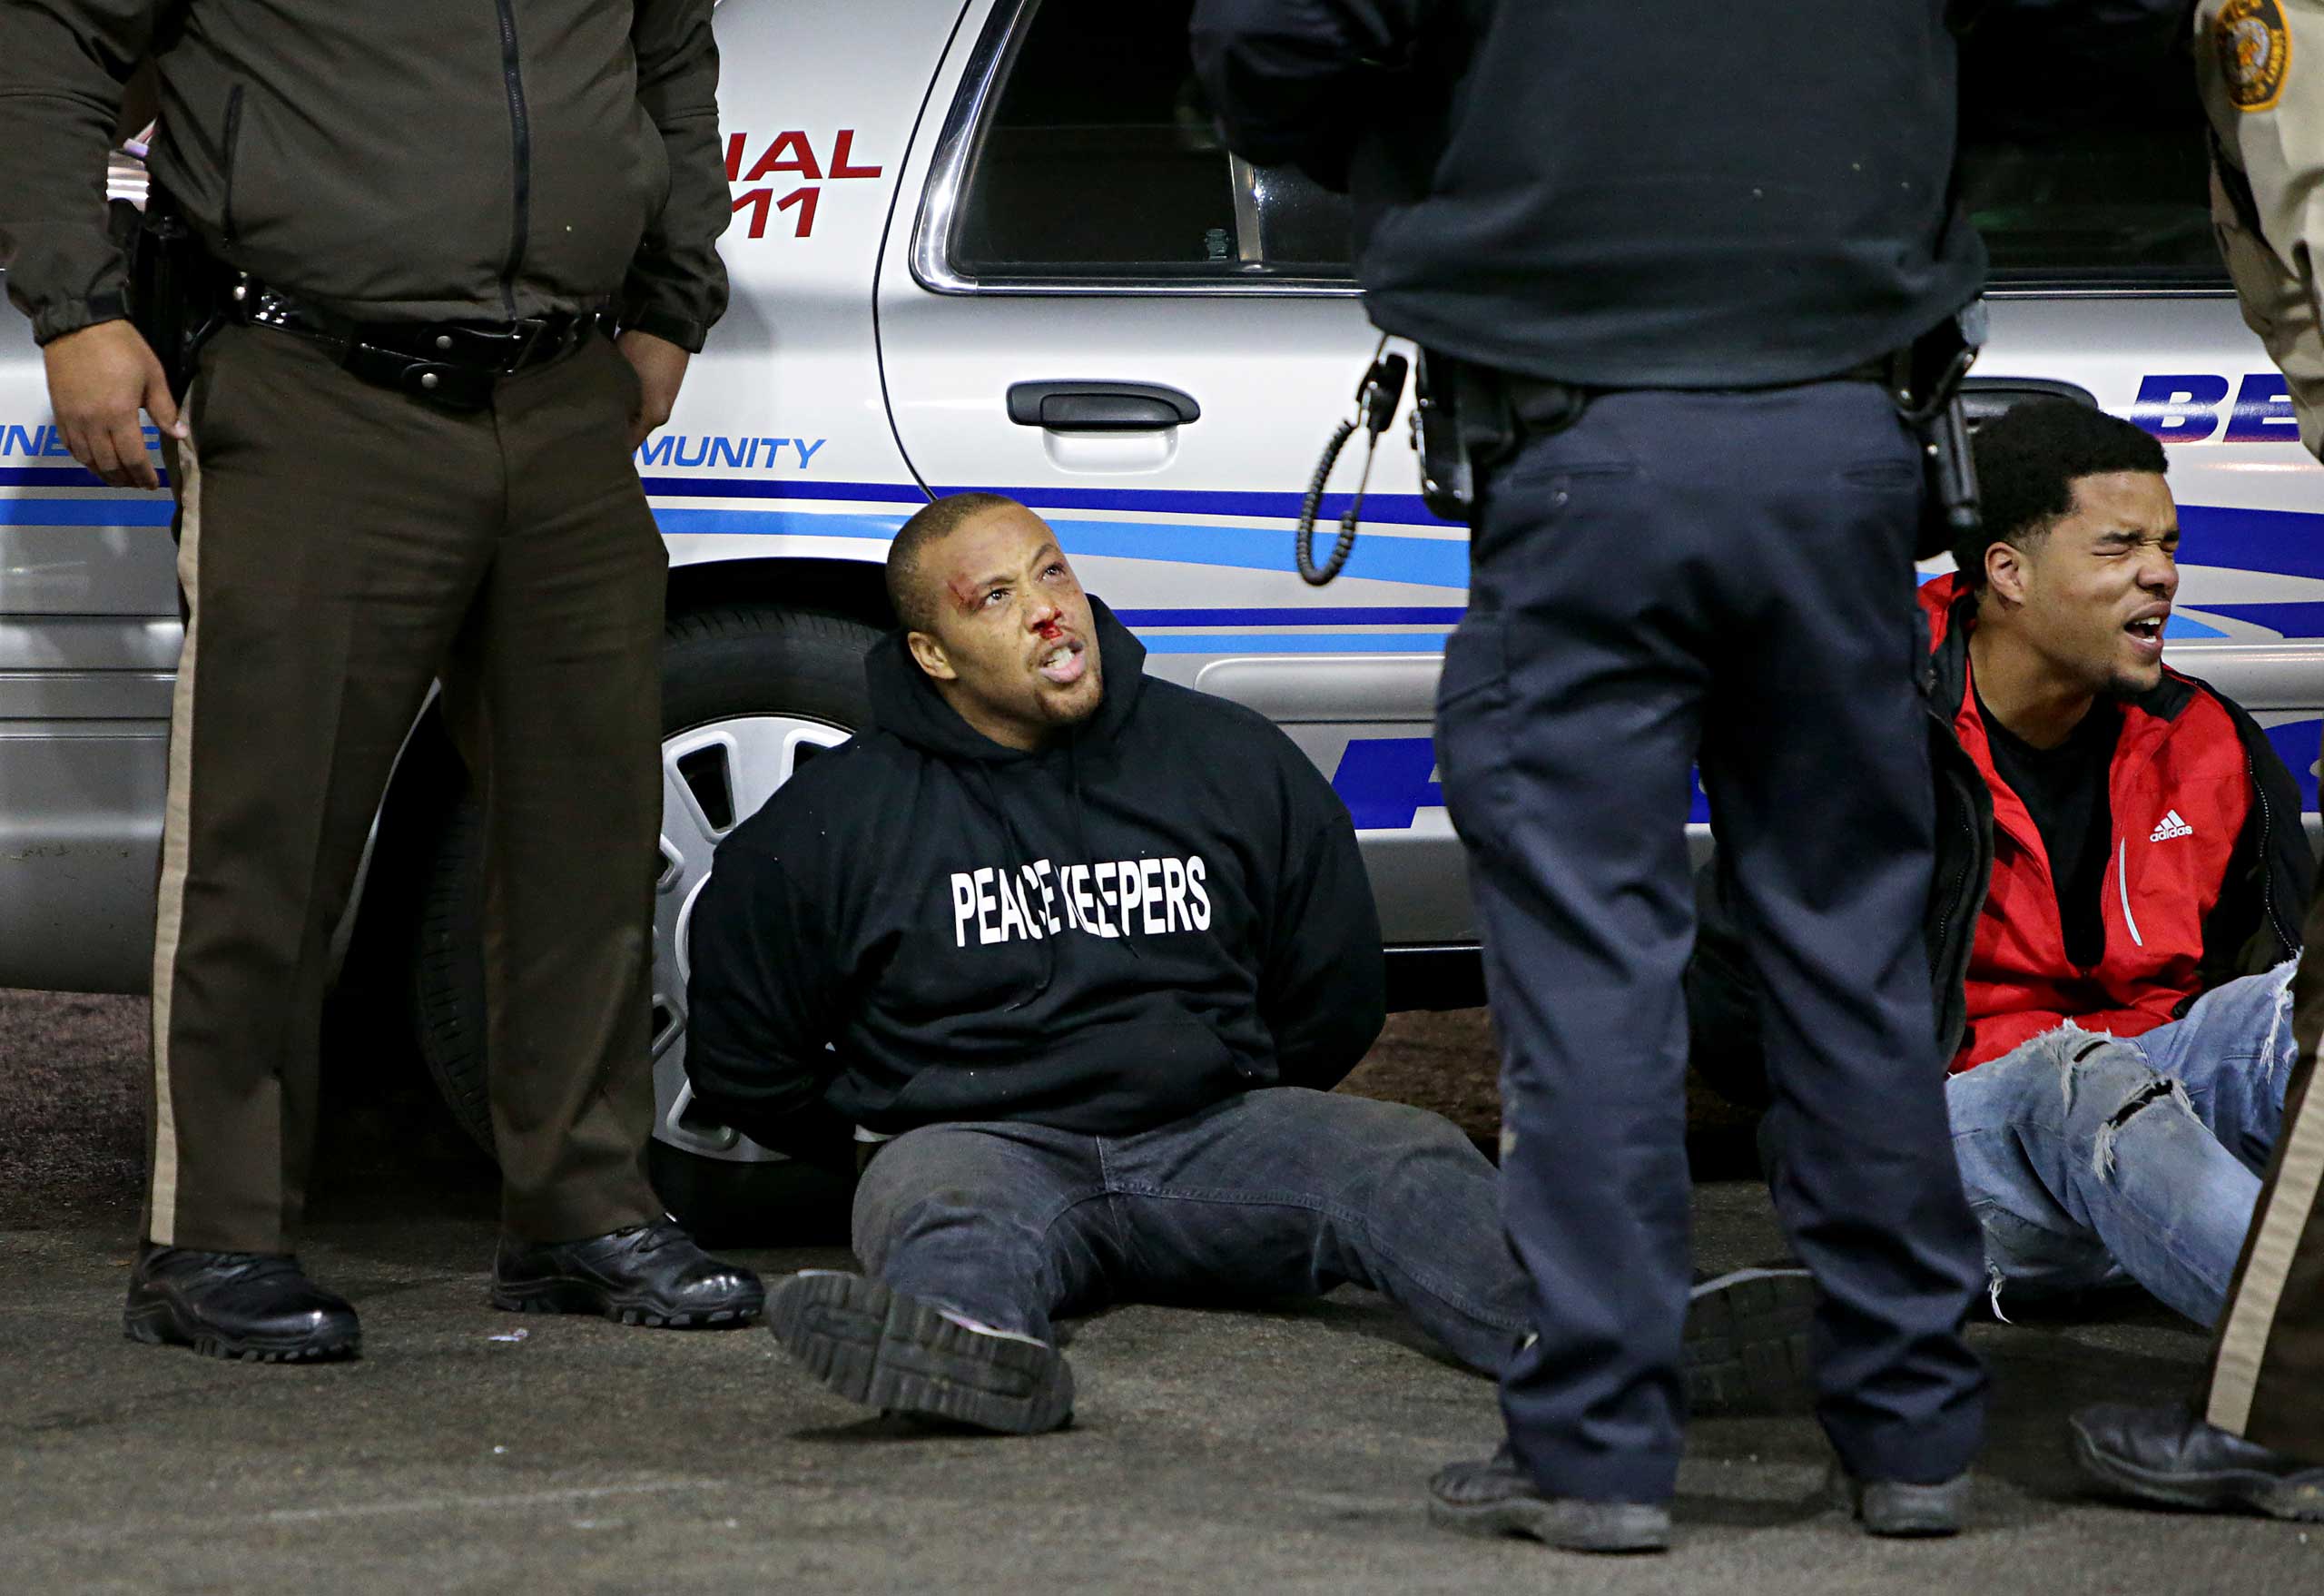 Police try to control a crowd on Dec. 24, 2014, on the lot of a gas station following a shooting in Berkeley, Mo.